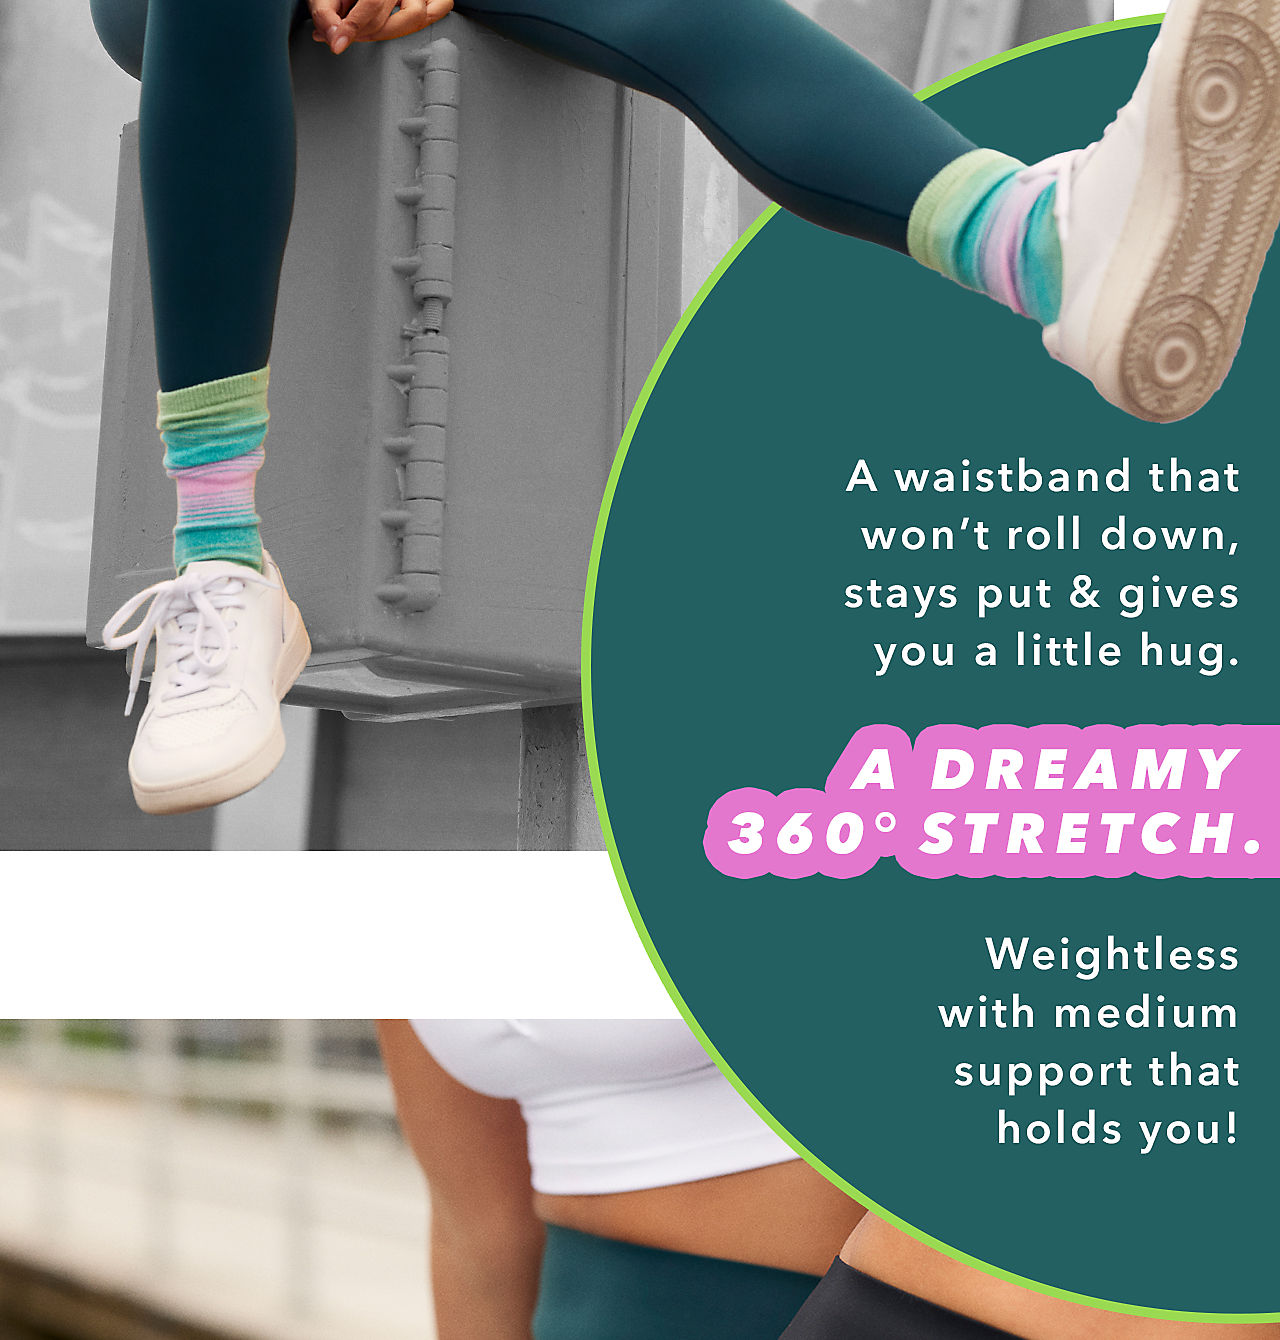 A waistband that won't roll down, stays put & gives you a little hug. A Dreamy 360° Stretch. Weightless with medium support that holds you!  A waistband that won't roll down, stays put gives you a little hug. A DREAMY 360 STRETCH. Weightless with medium support that holds you! 